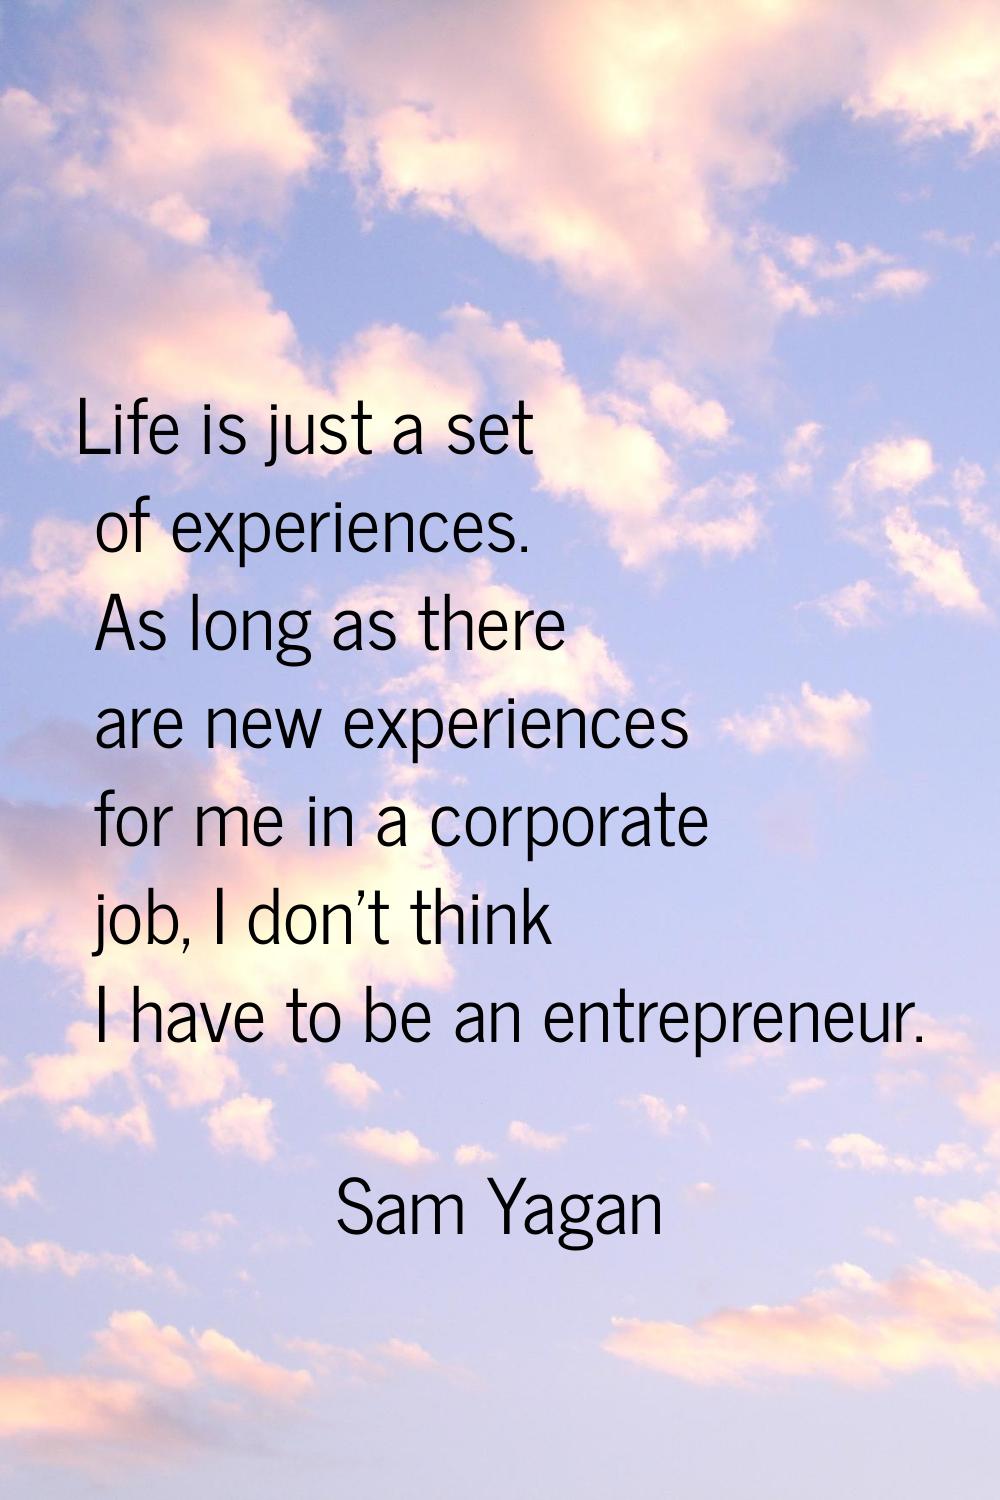 Life is just a set of experiences. As long as there are new experiences for me in a corporate job, 